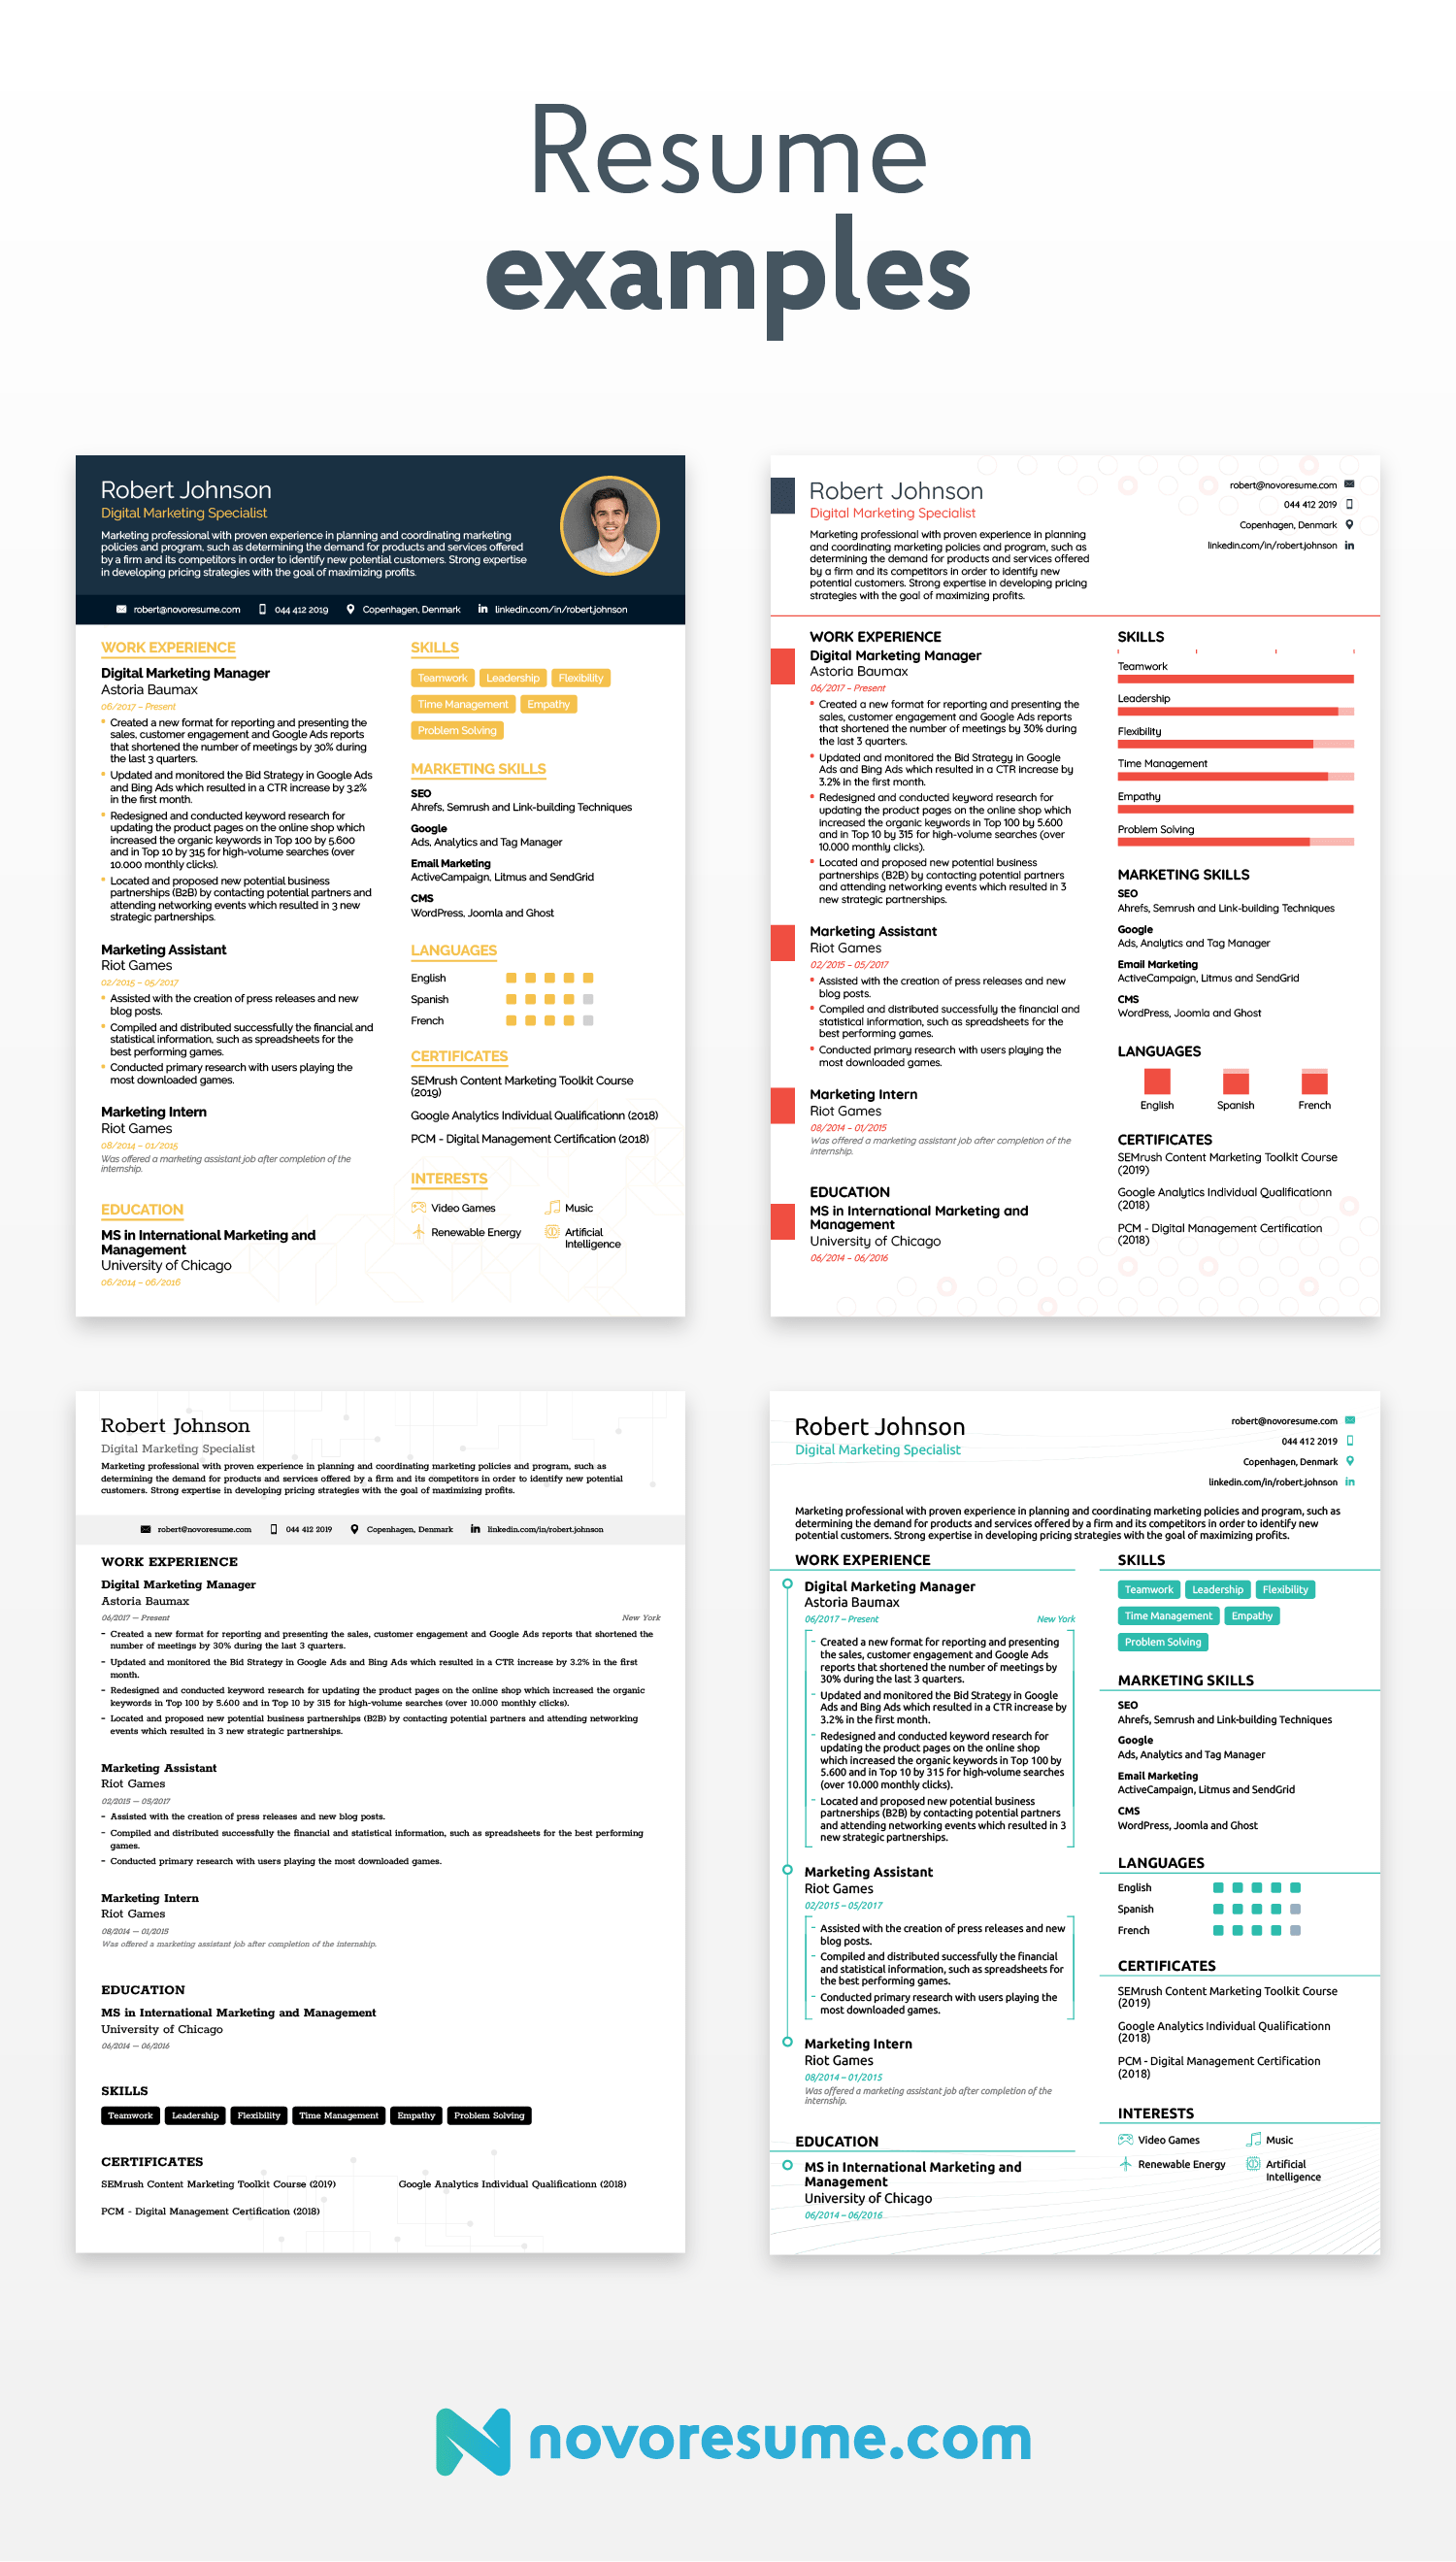 resume examples for recruiters